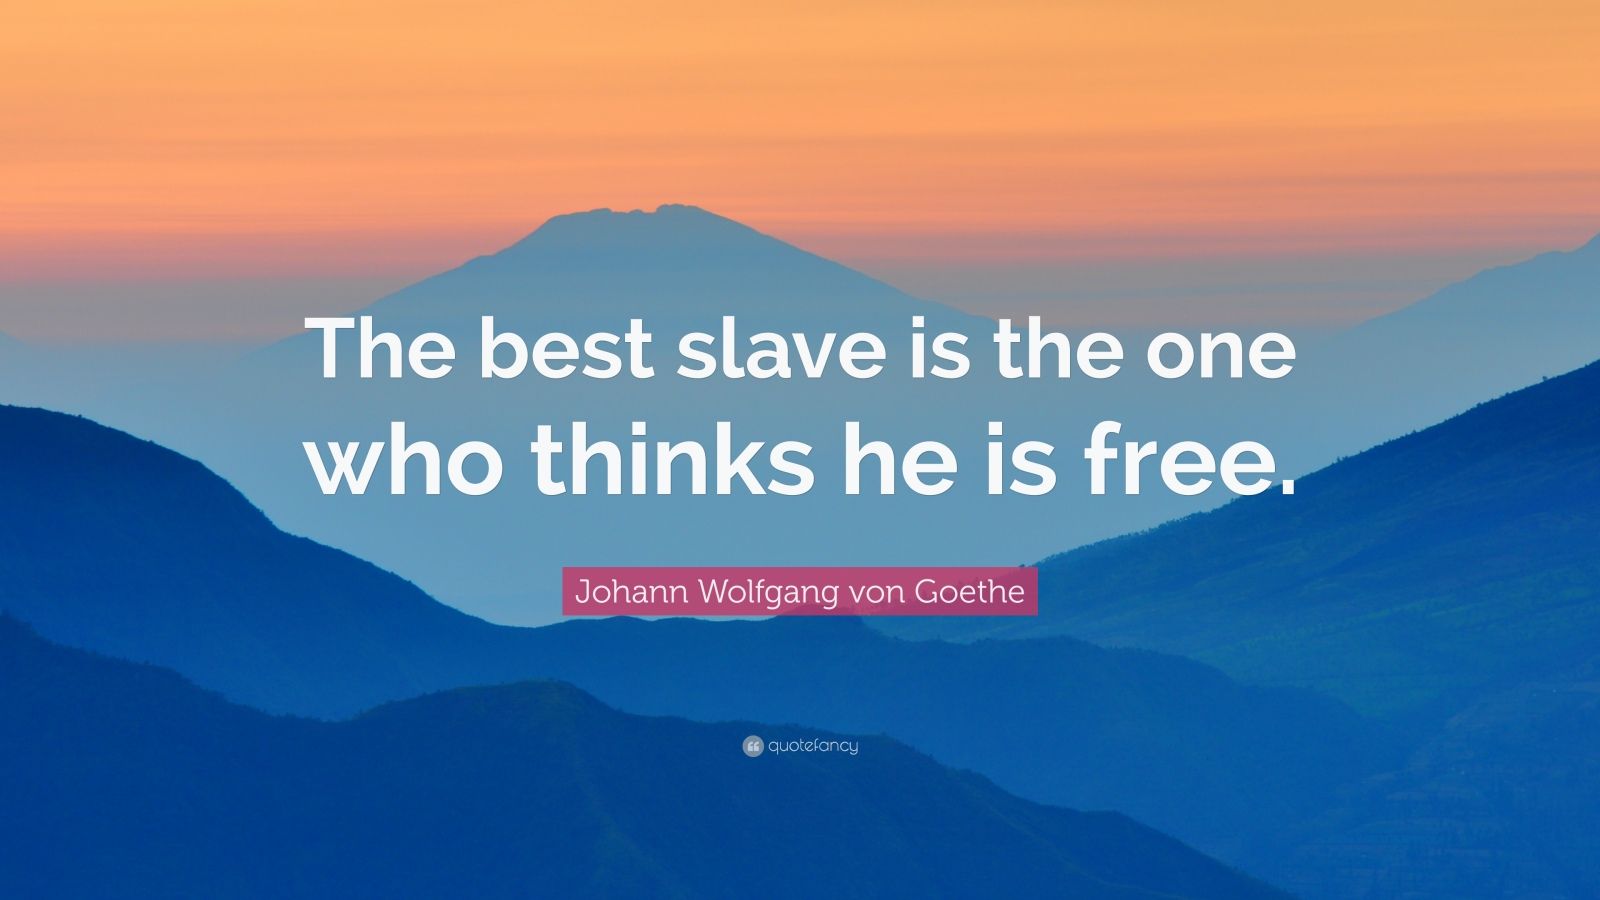 Johann Wolfgang von Goethe Quote: “The best slave is the one who thinks ...